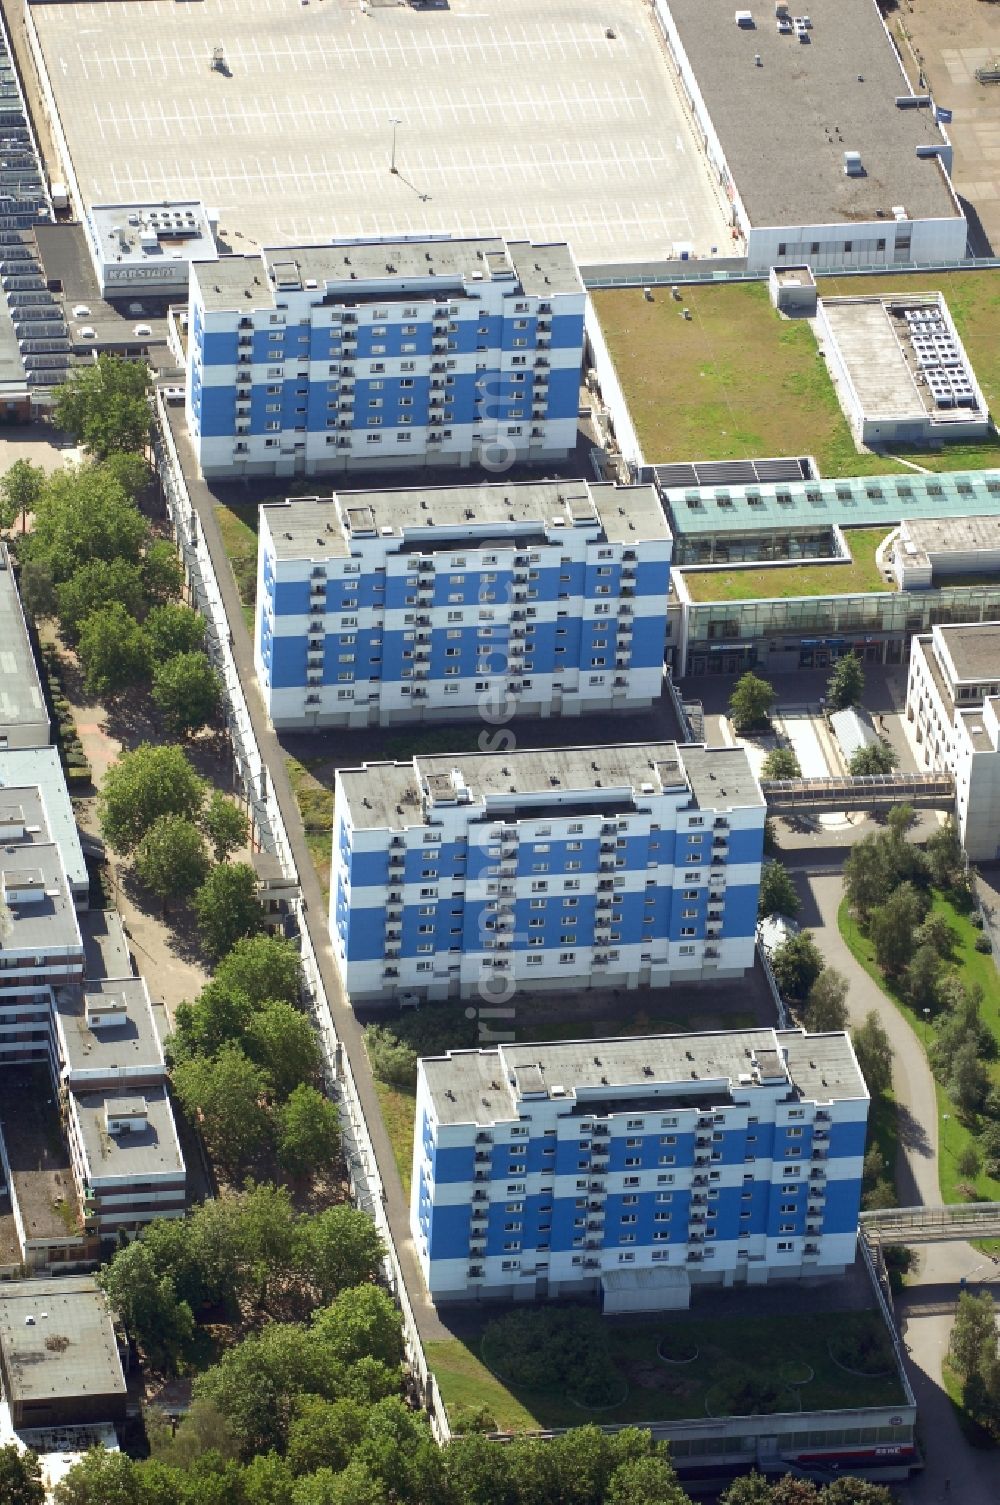 Aerial image Norderstedt - Roof and wall structures in residential area of a multi-family house settlement on Herold Center in Norderstedt in the state Schleswig-Holstein, Germany